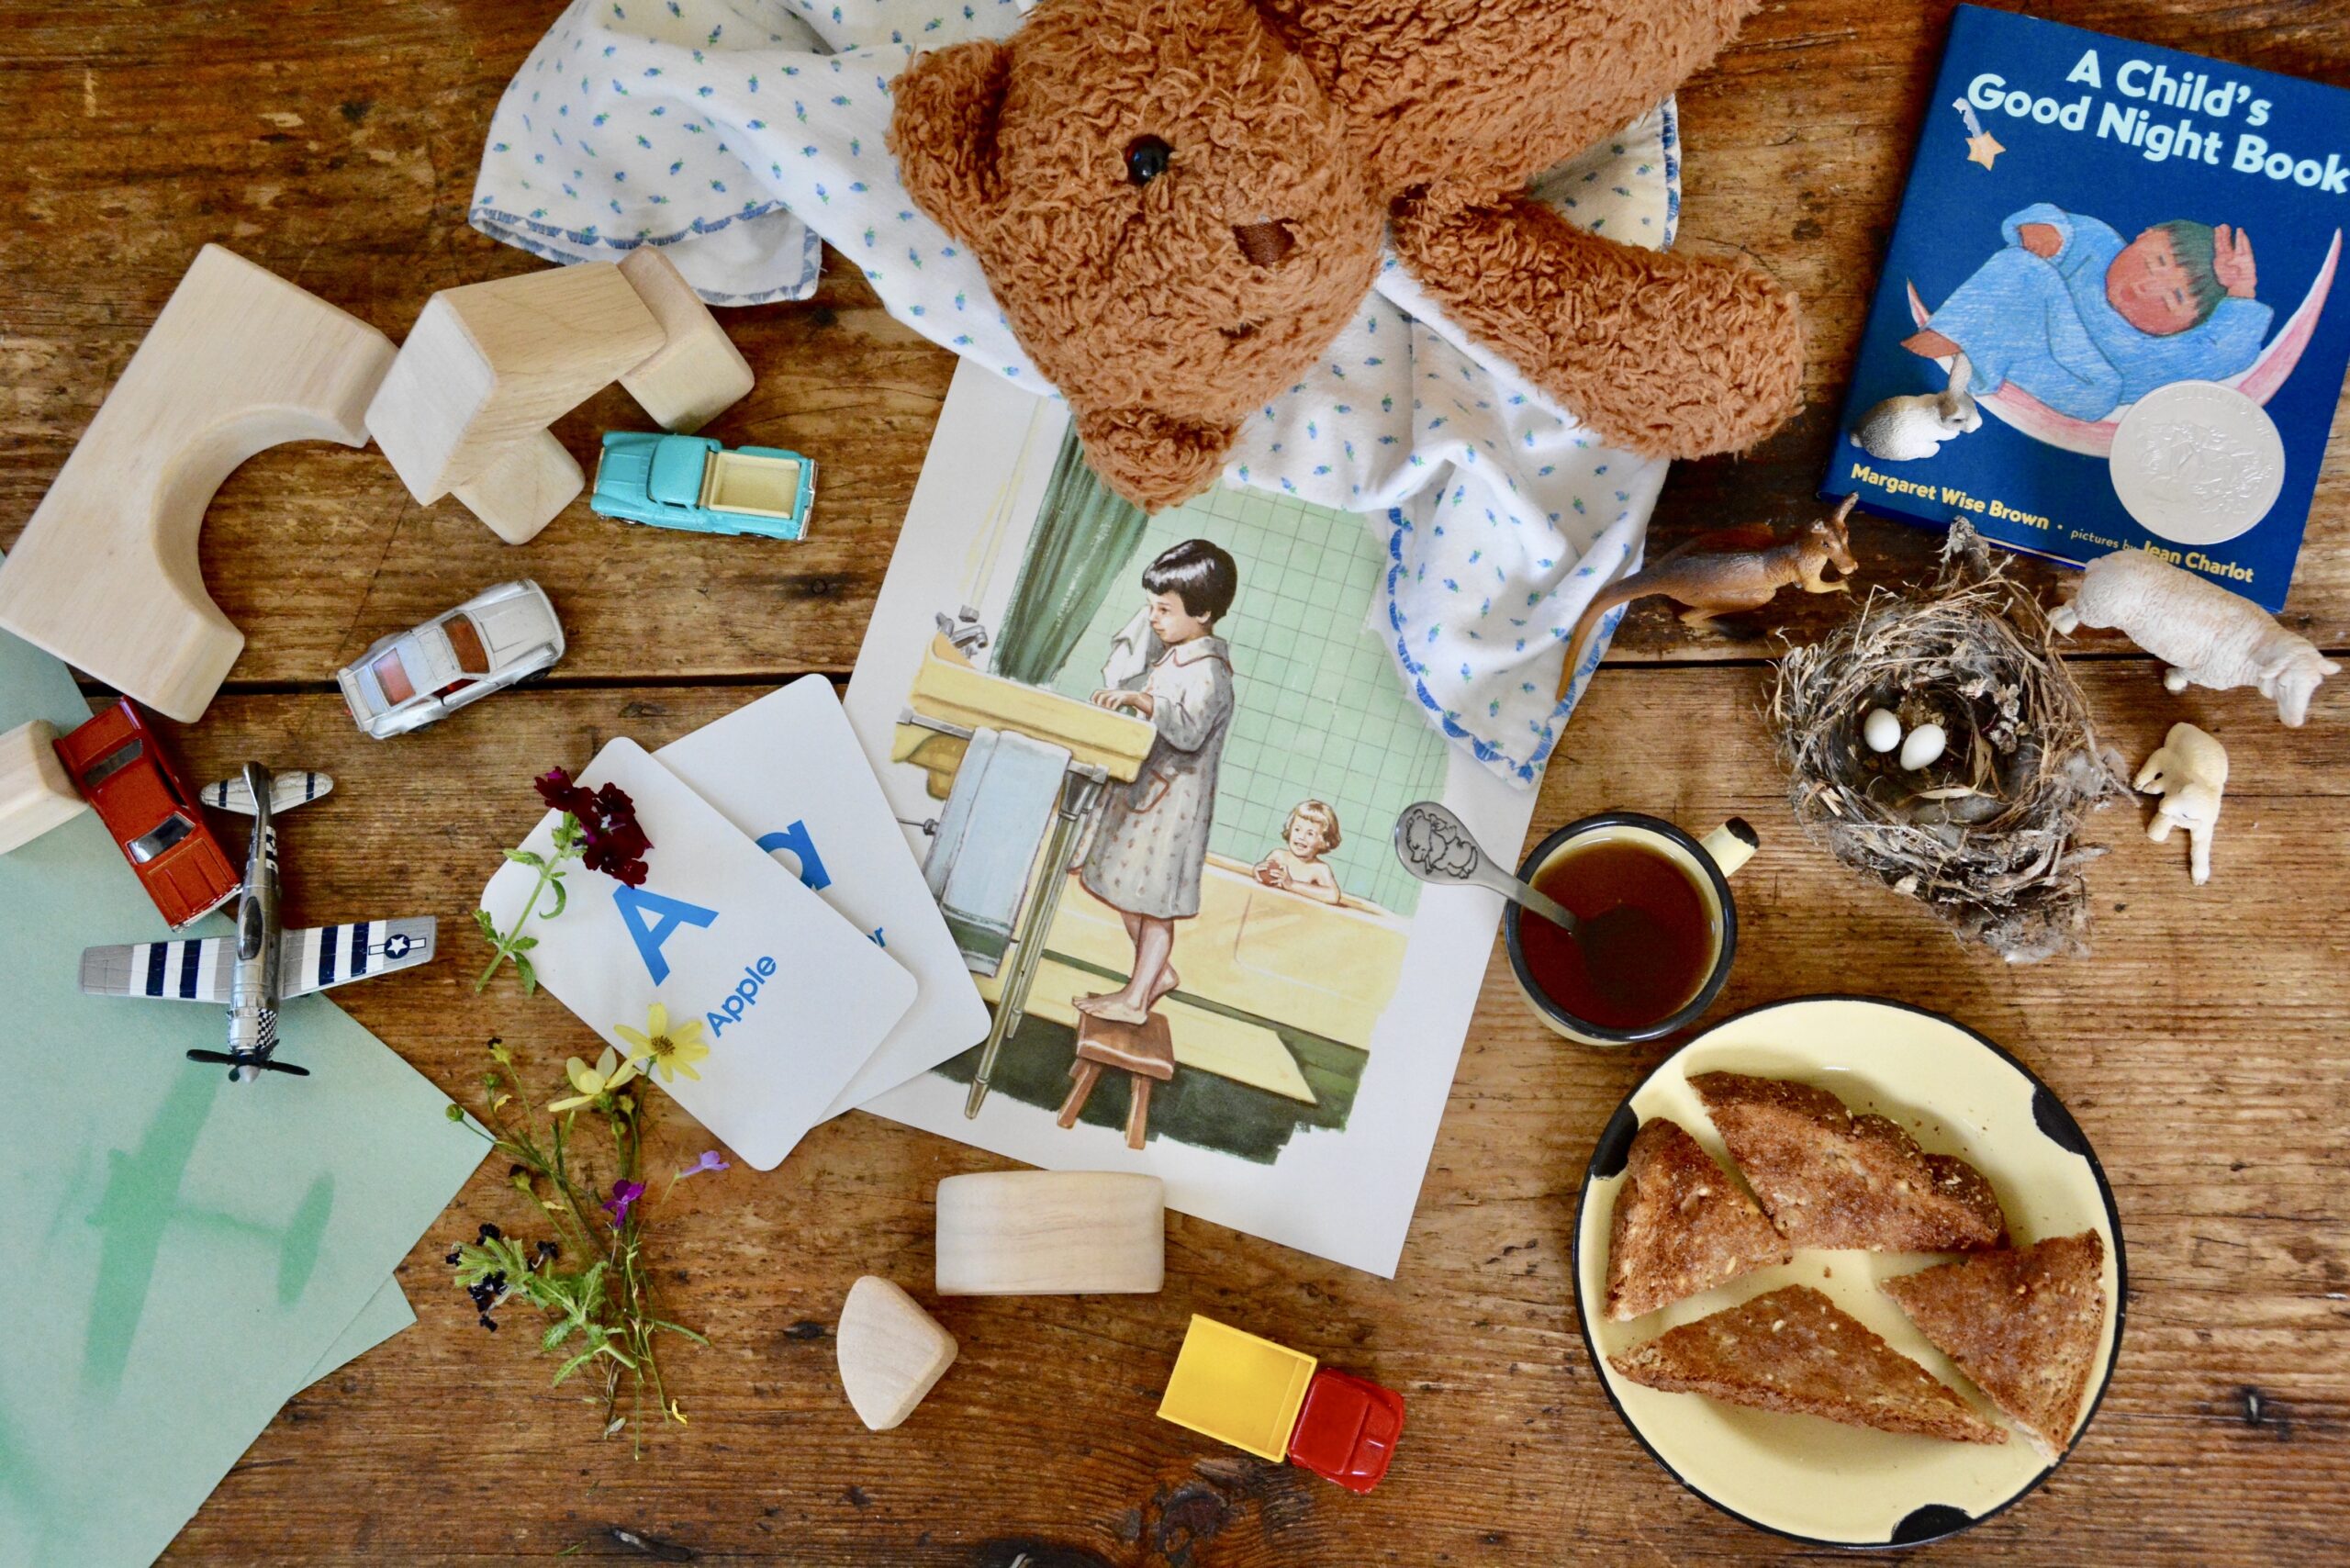 a messy collection of materials on a wooden table used for a preschool lesson including a teddy bear, Aa flash cards, small cars, wooden blocks and a snack of tea and toast.